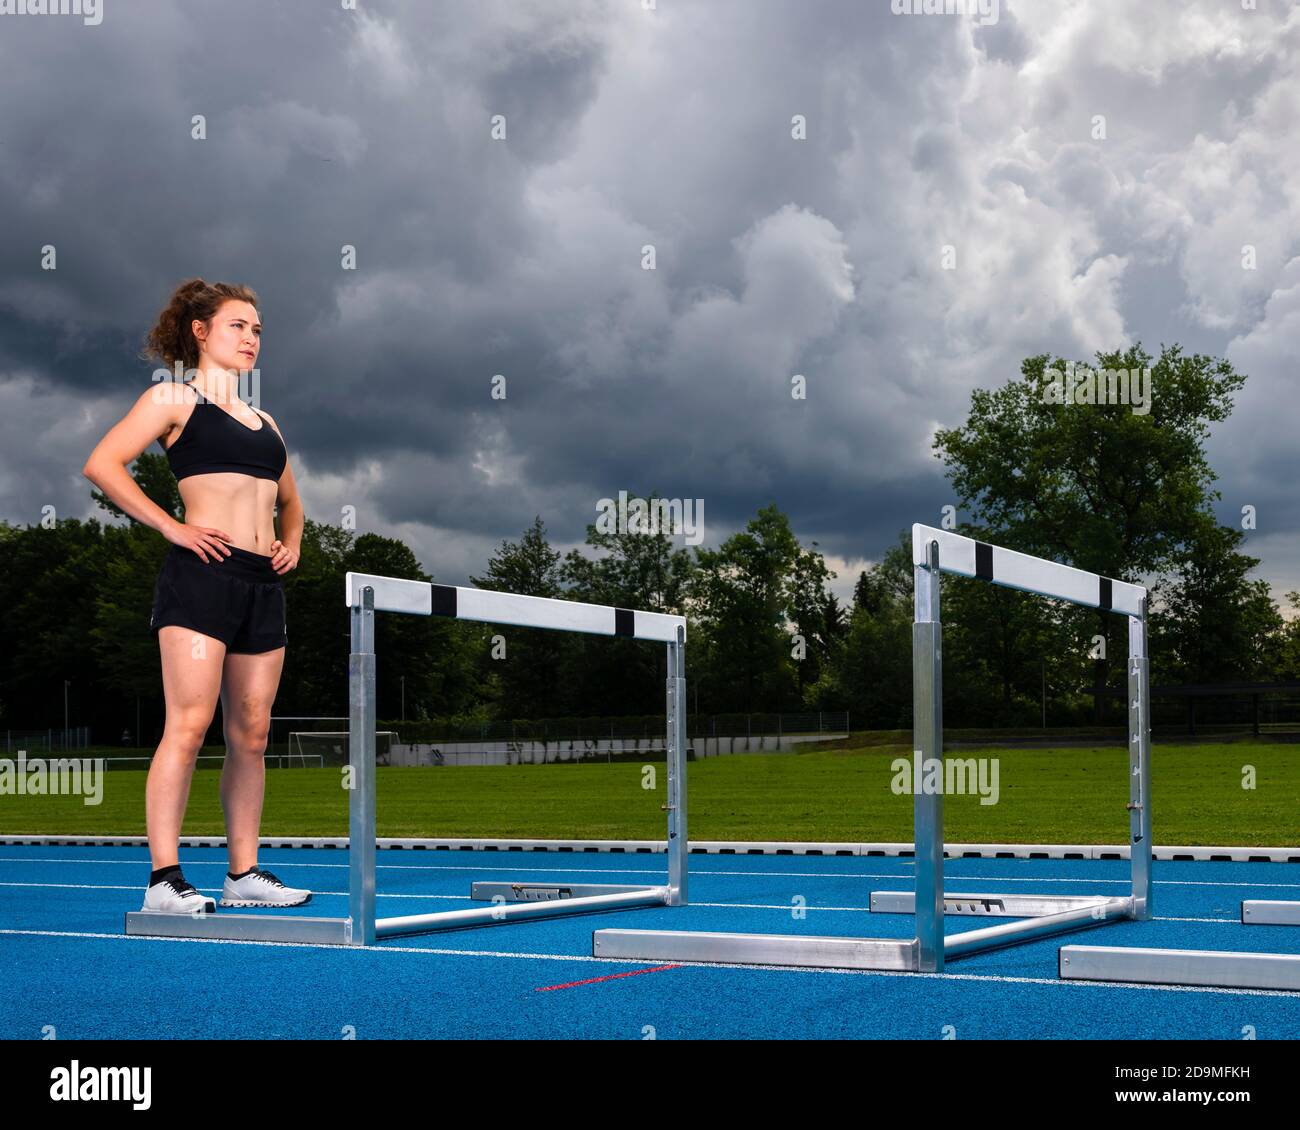 Woman, 24 years, athletics, jumping strength training, Baden-Württemberg, Germany Stock Photo